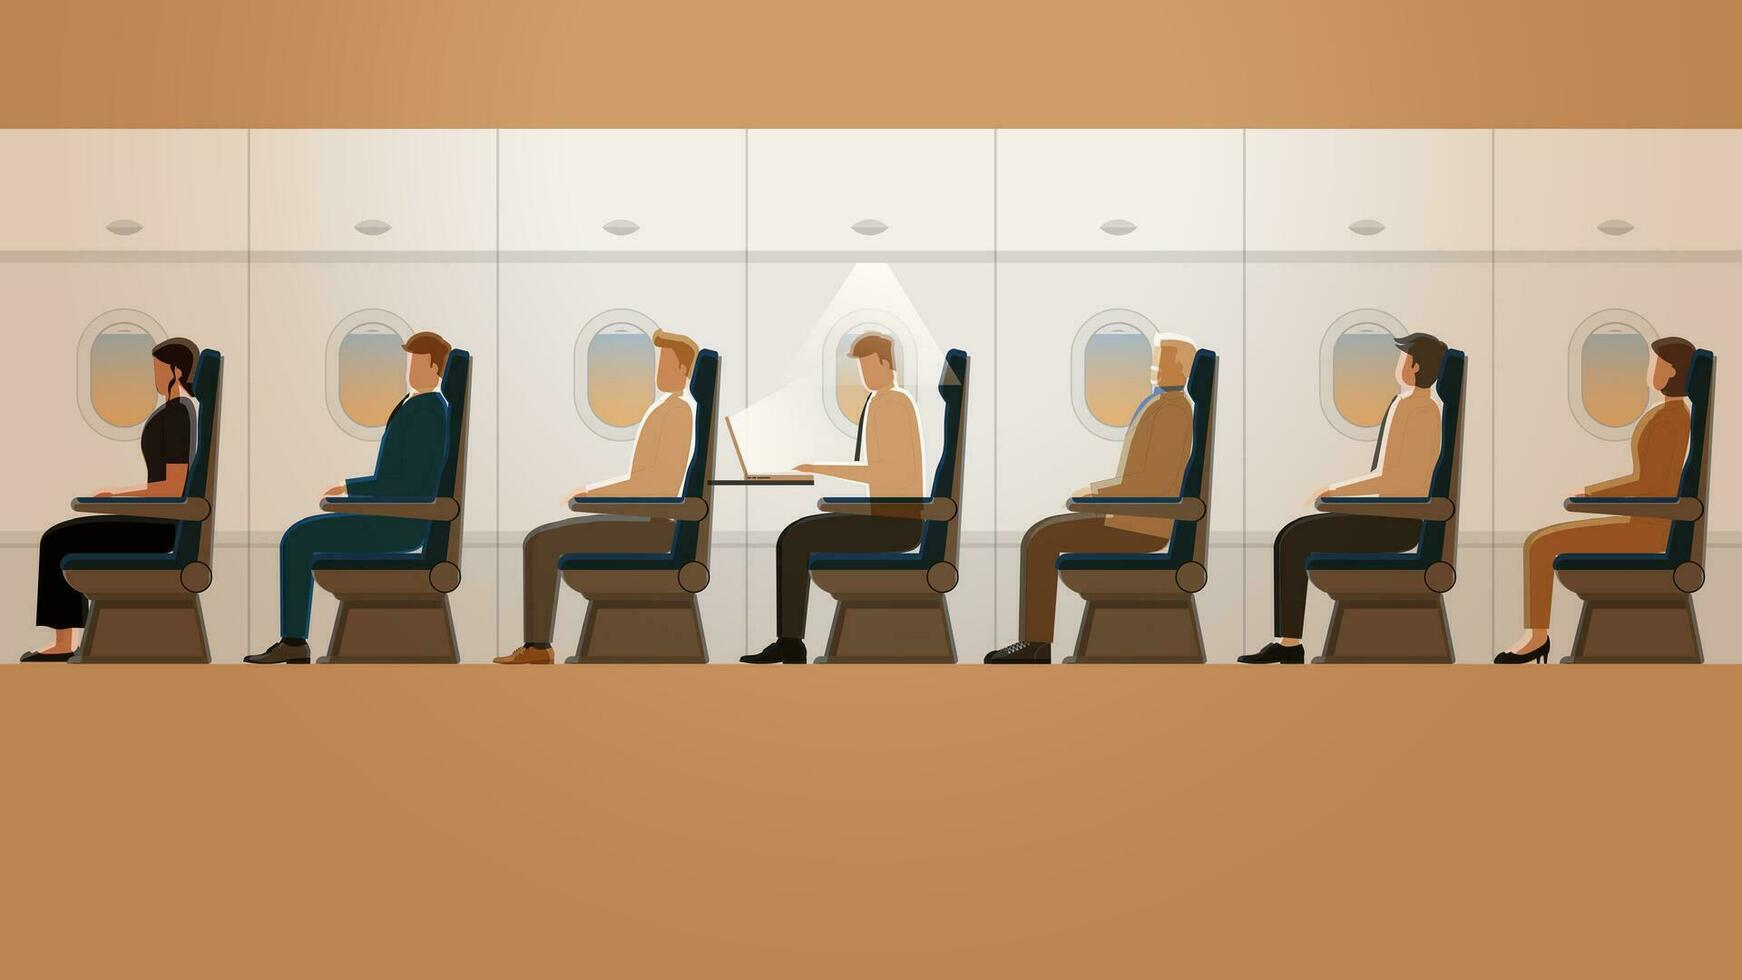 Employee salaryman working alone with laptop notebook while the other passengers are asleep vector